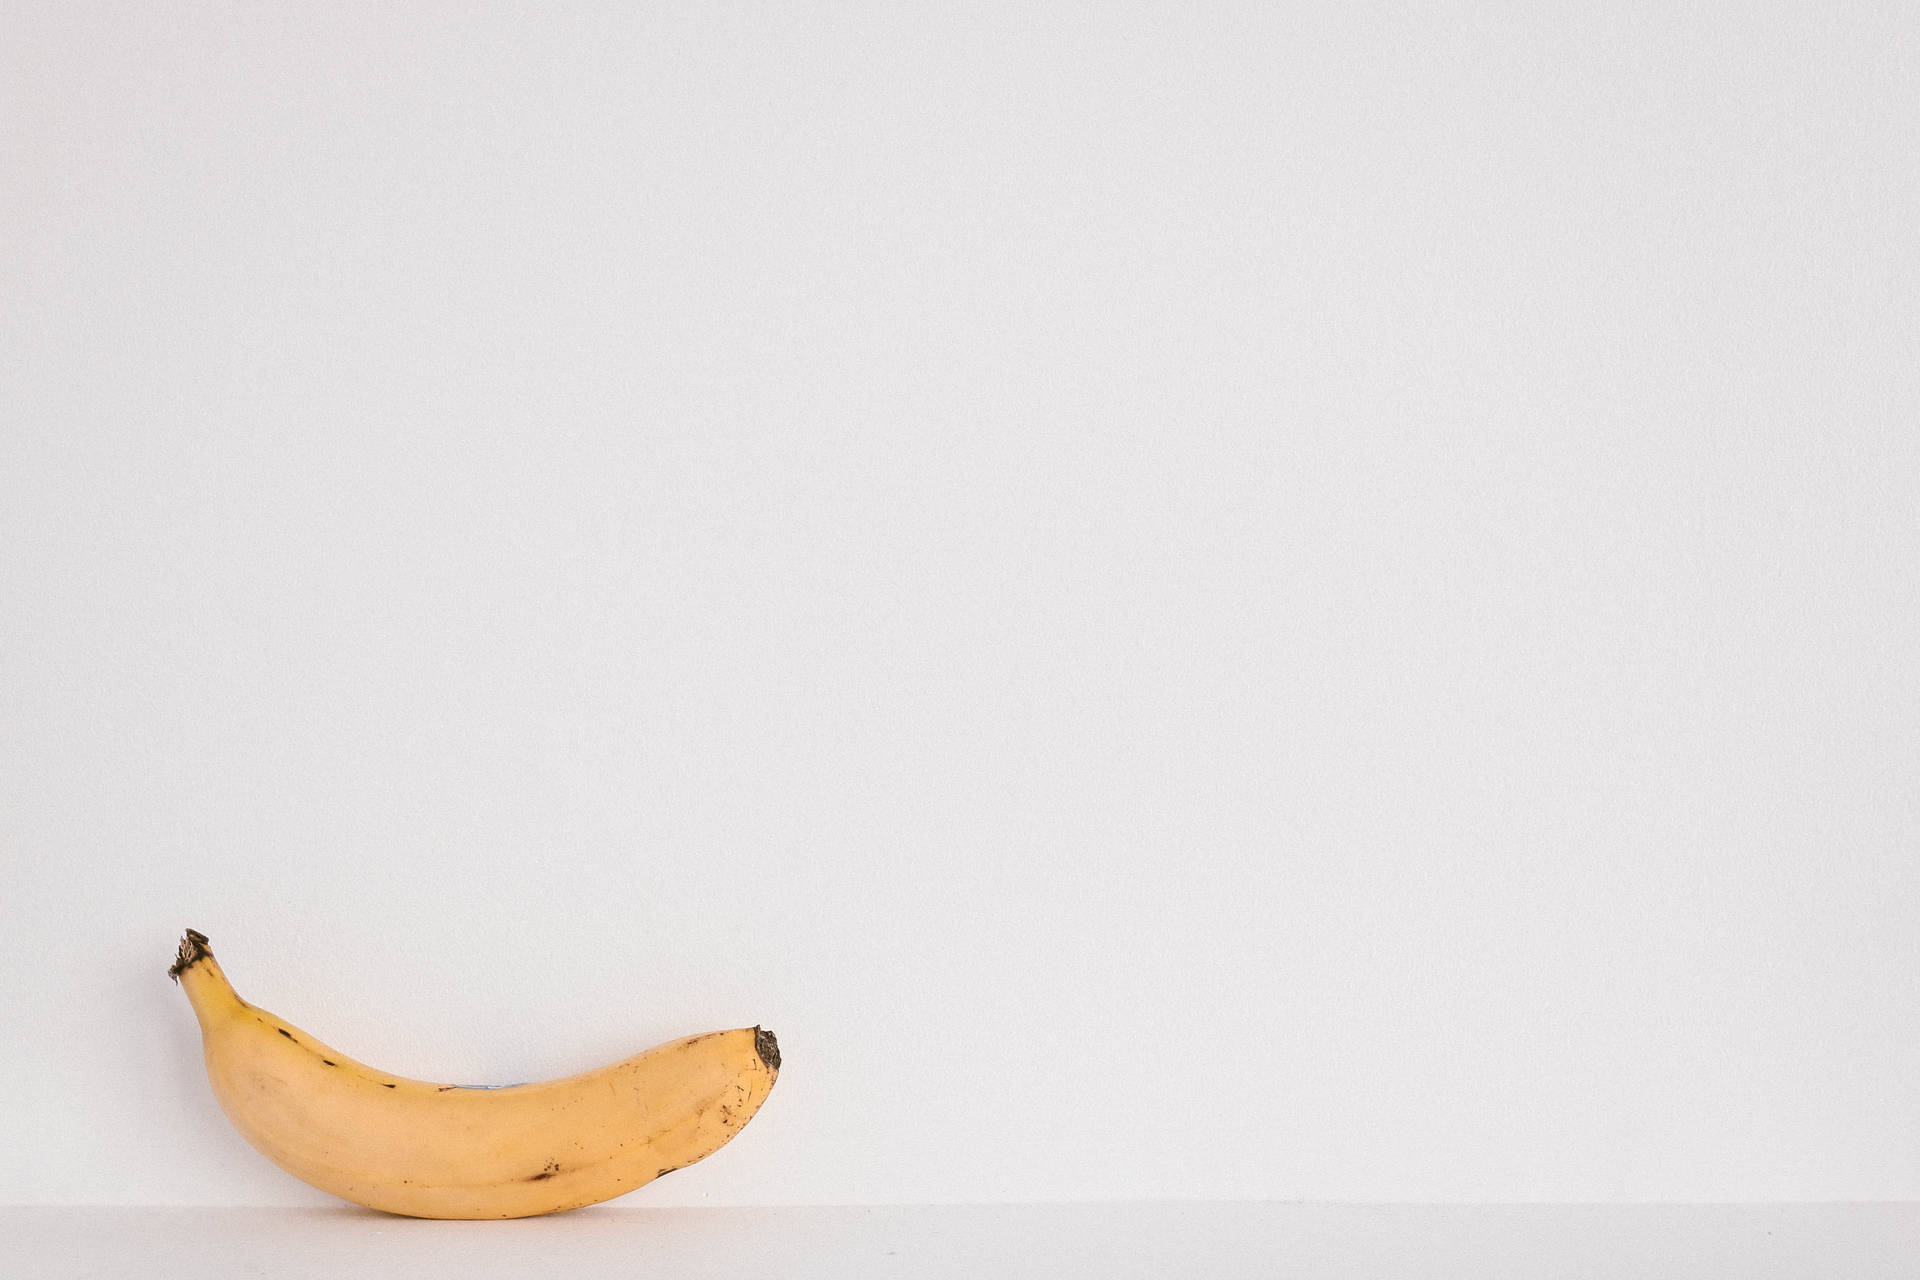 White Background With Banana Wallpaper